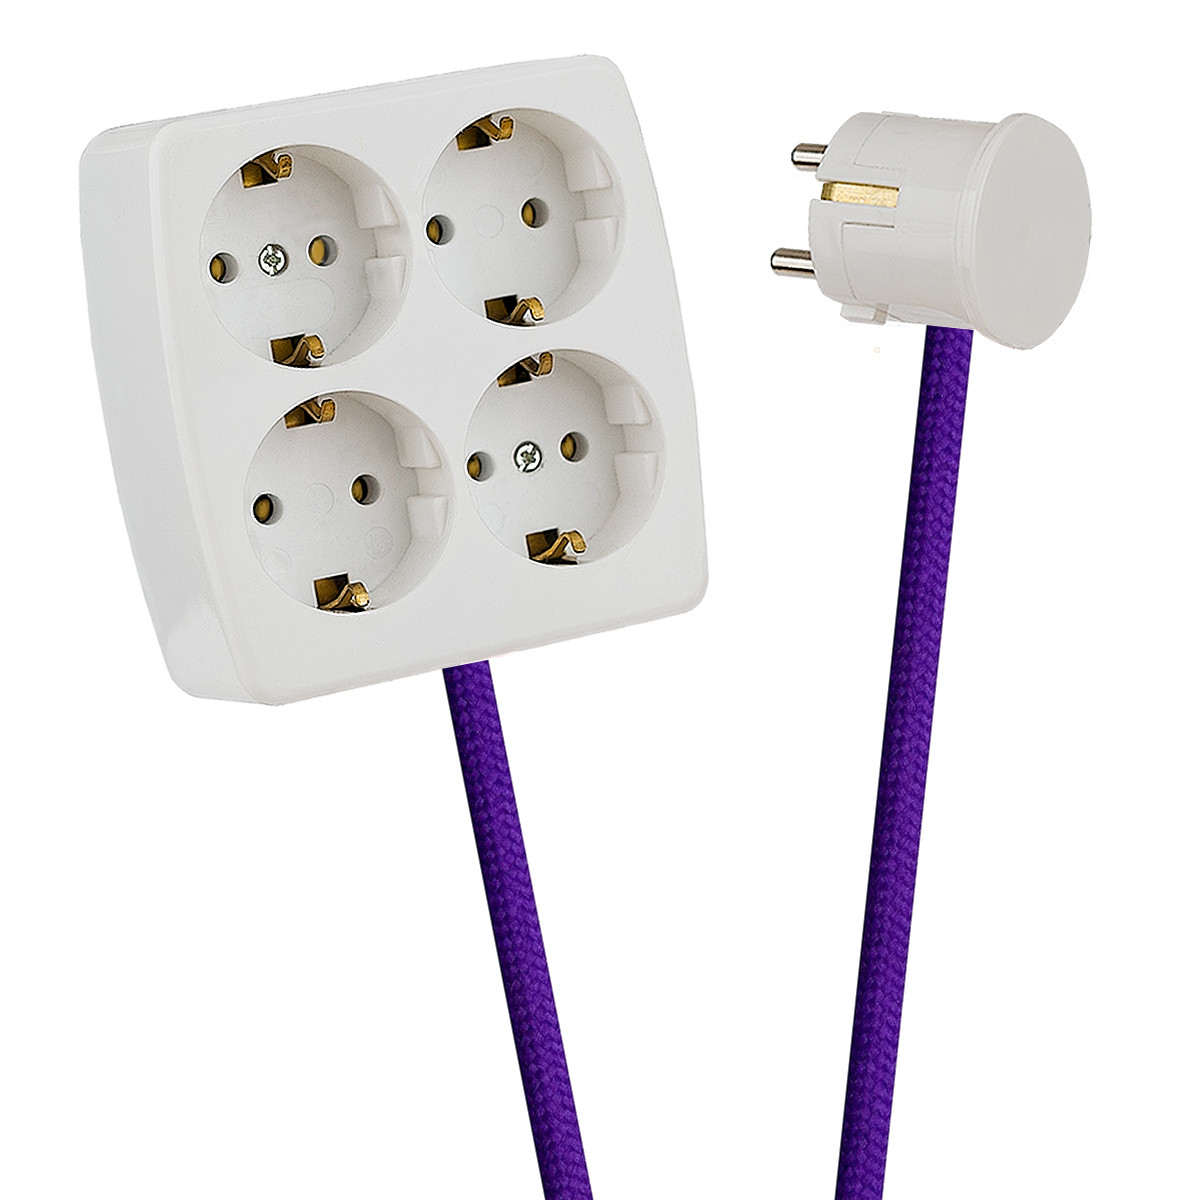 White 4-Way Socket Outlet Purple